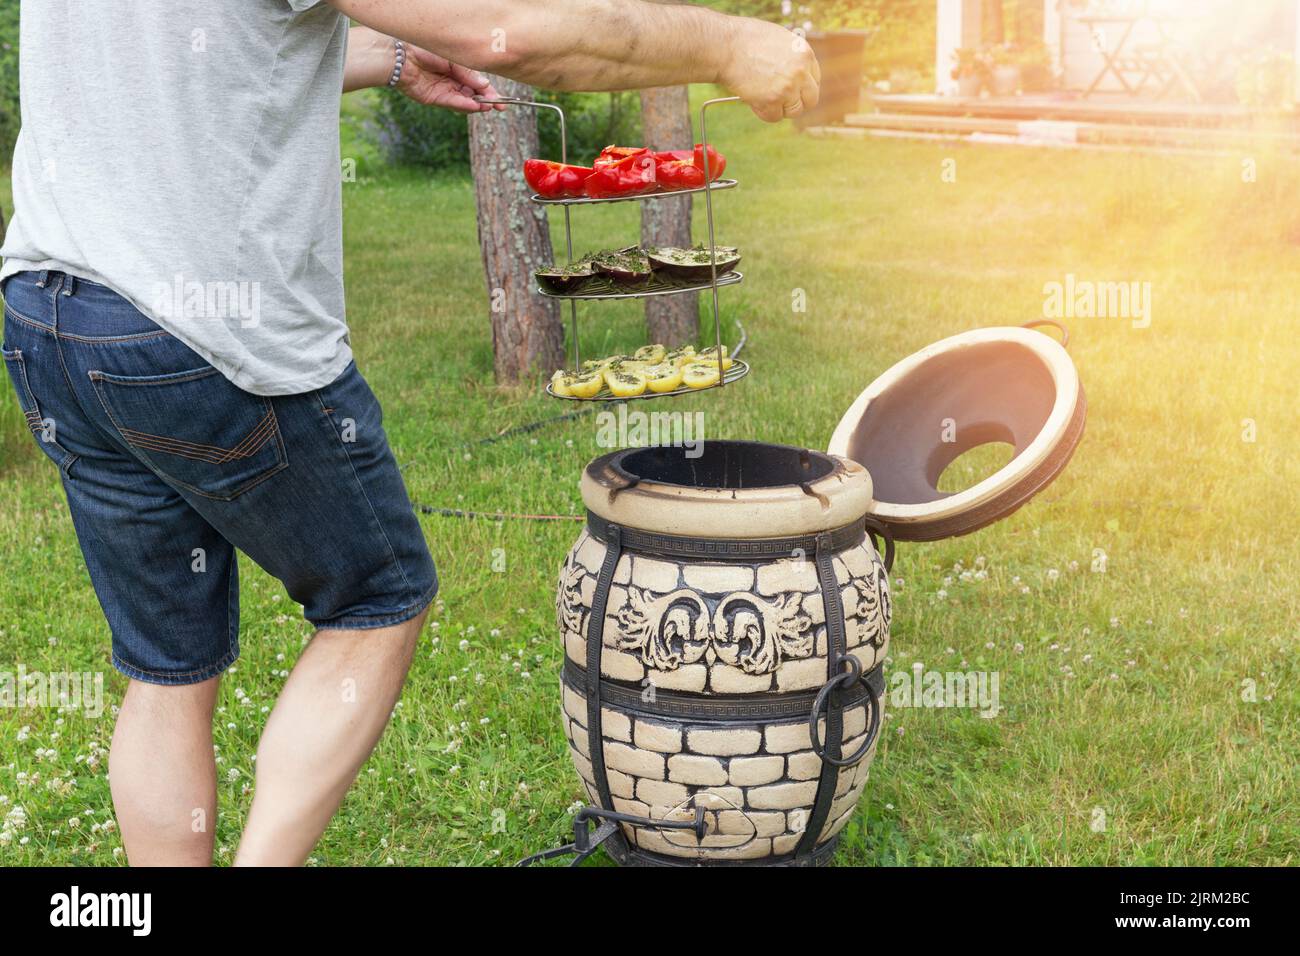 Cooking vegetables on the tandoor. Man holding a grill with vegetables, beautiful formal garden with dining place. Stock Photo